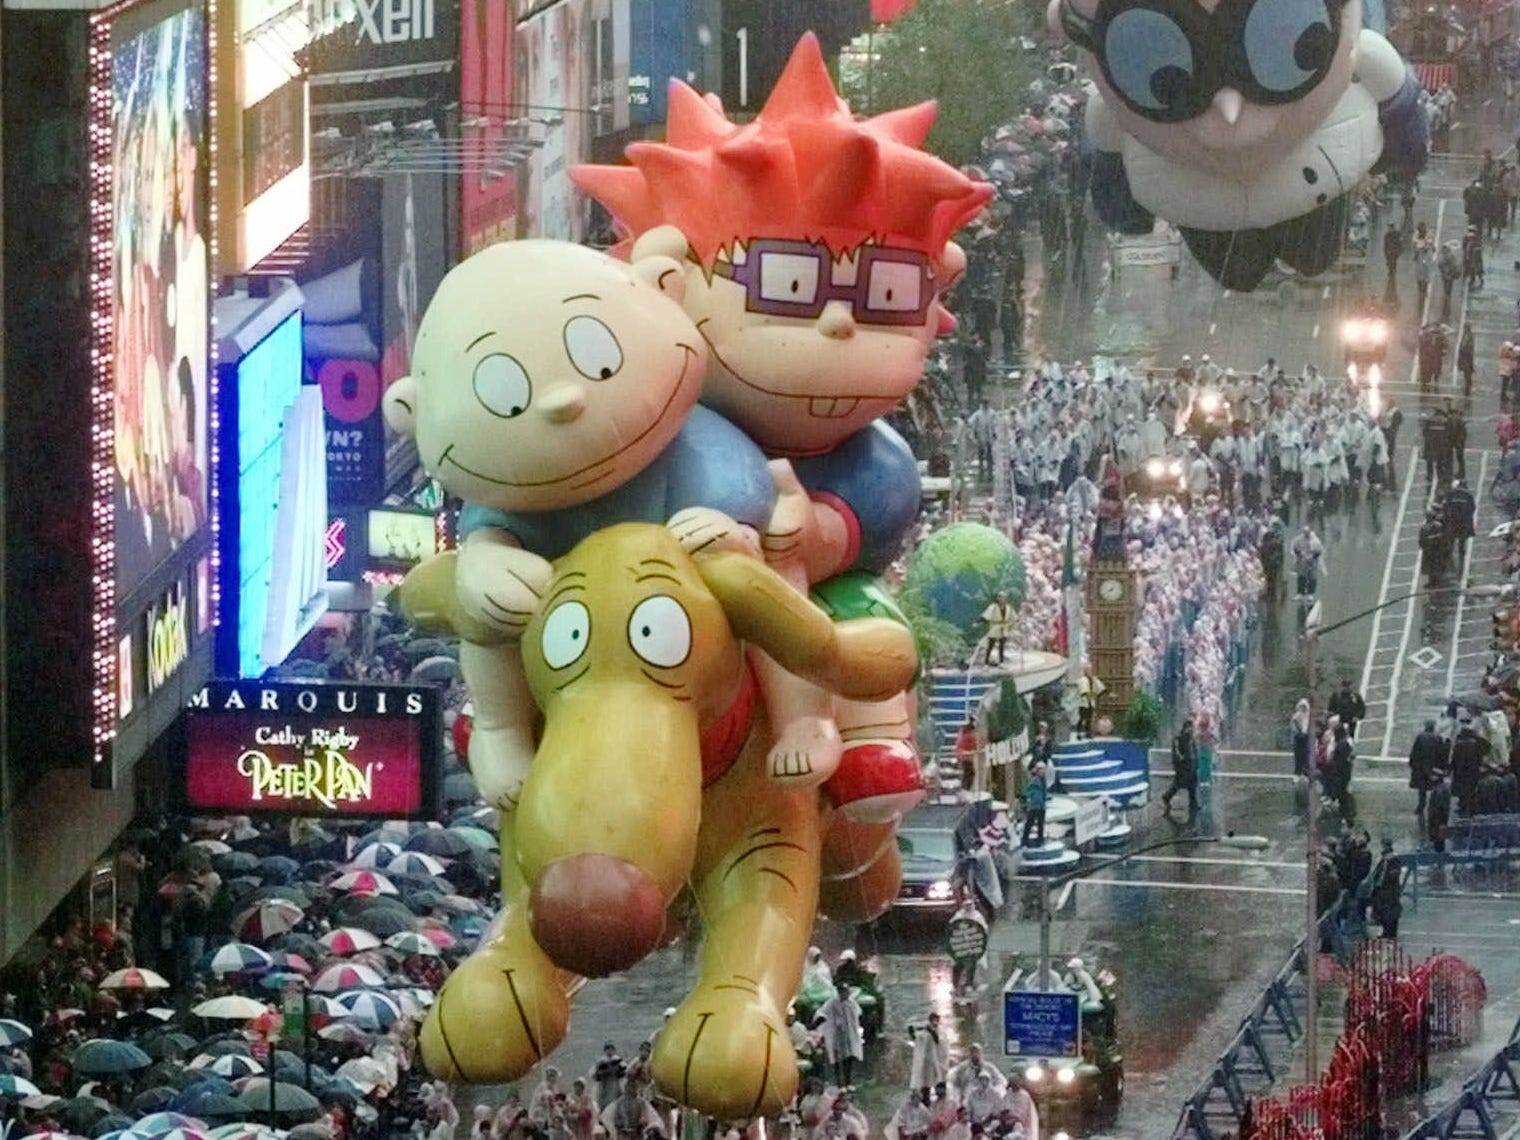 Rugrats-Ballons in der Macy's Thanksgiving Day Parade 1998